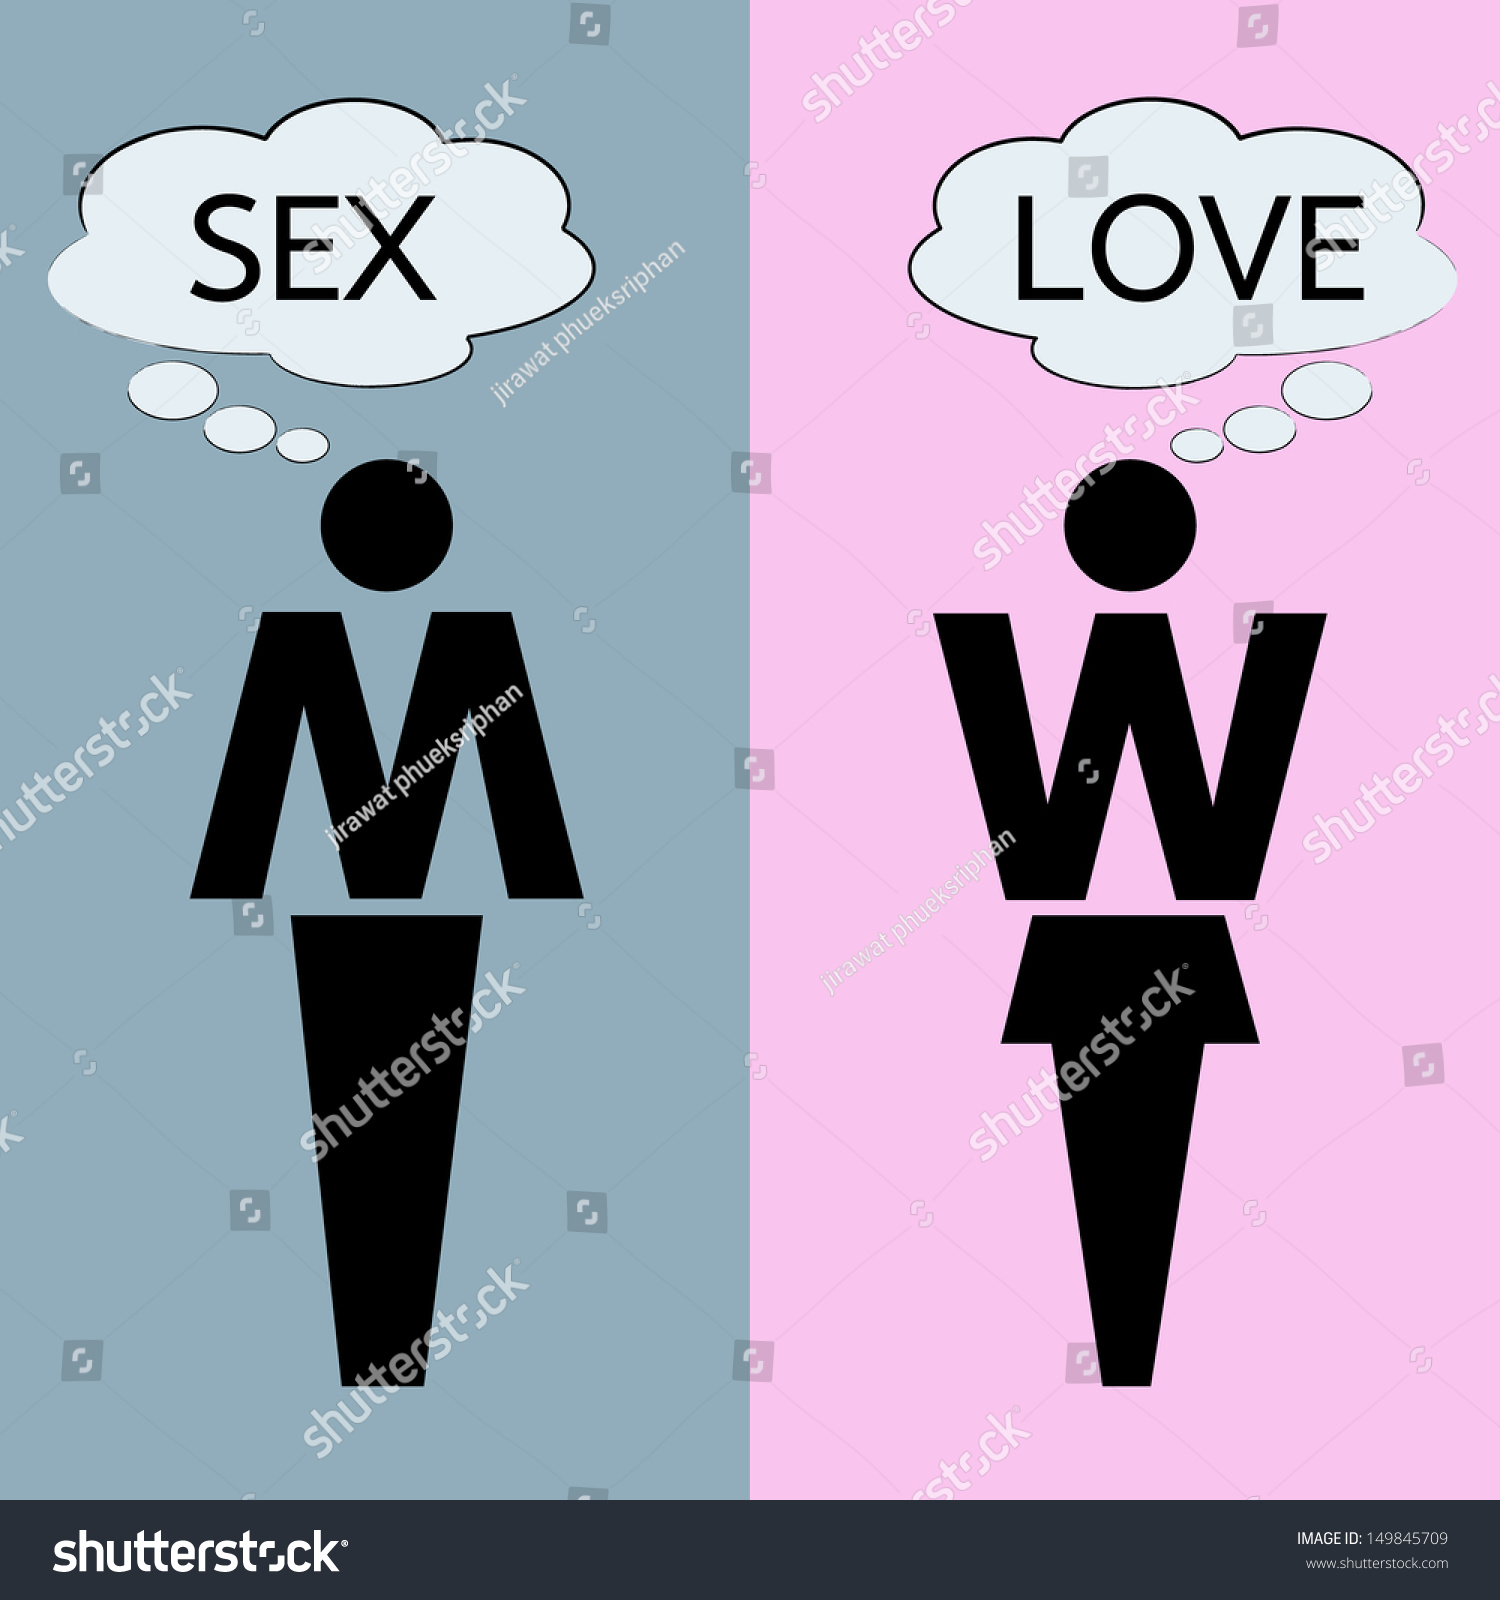 Man And Woman Thinking About Love And Sex Stock Vector Illustration 149845709 Shutterstock